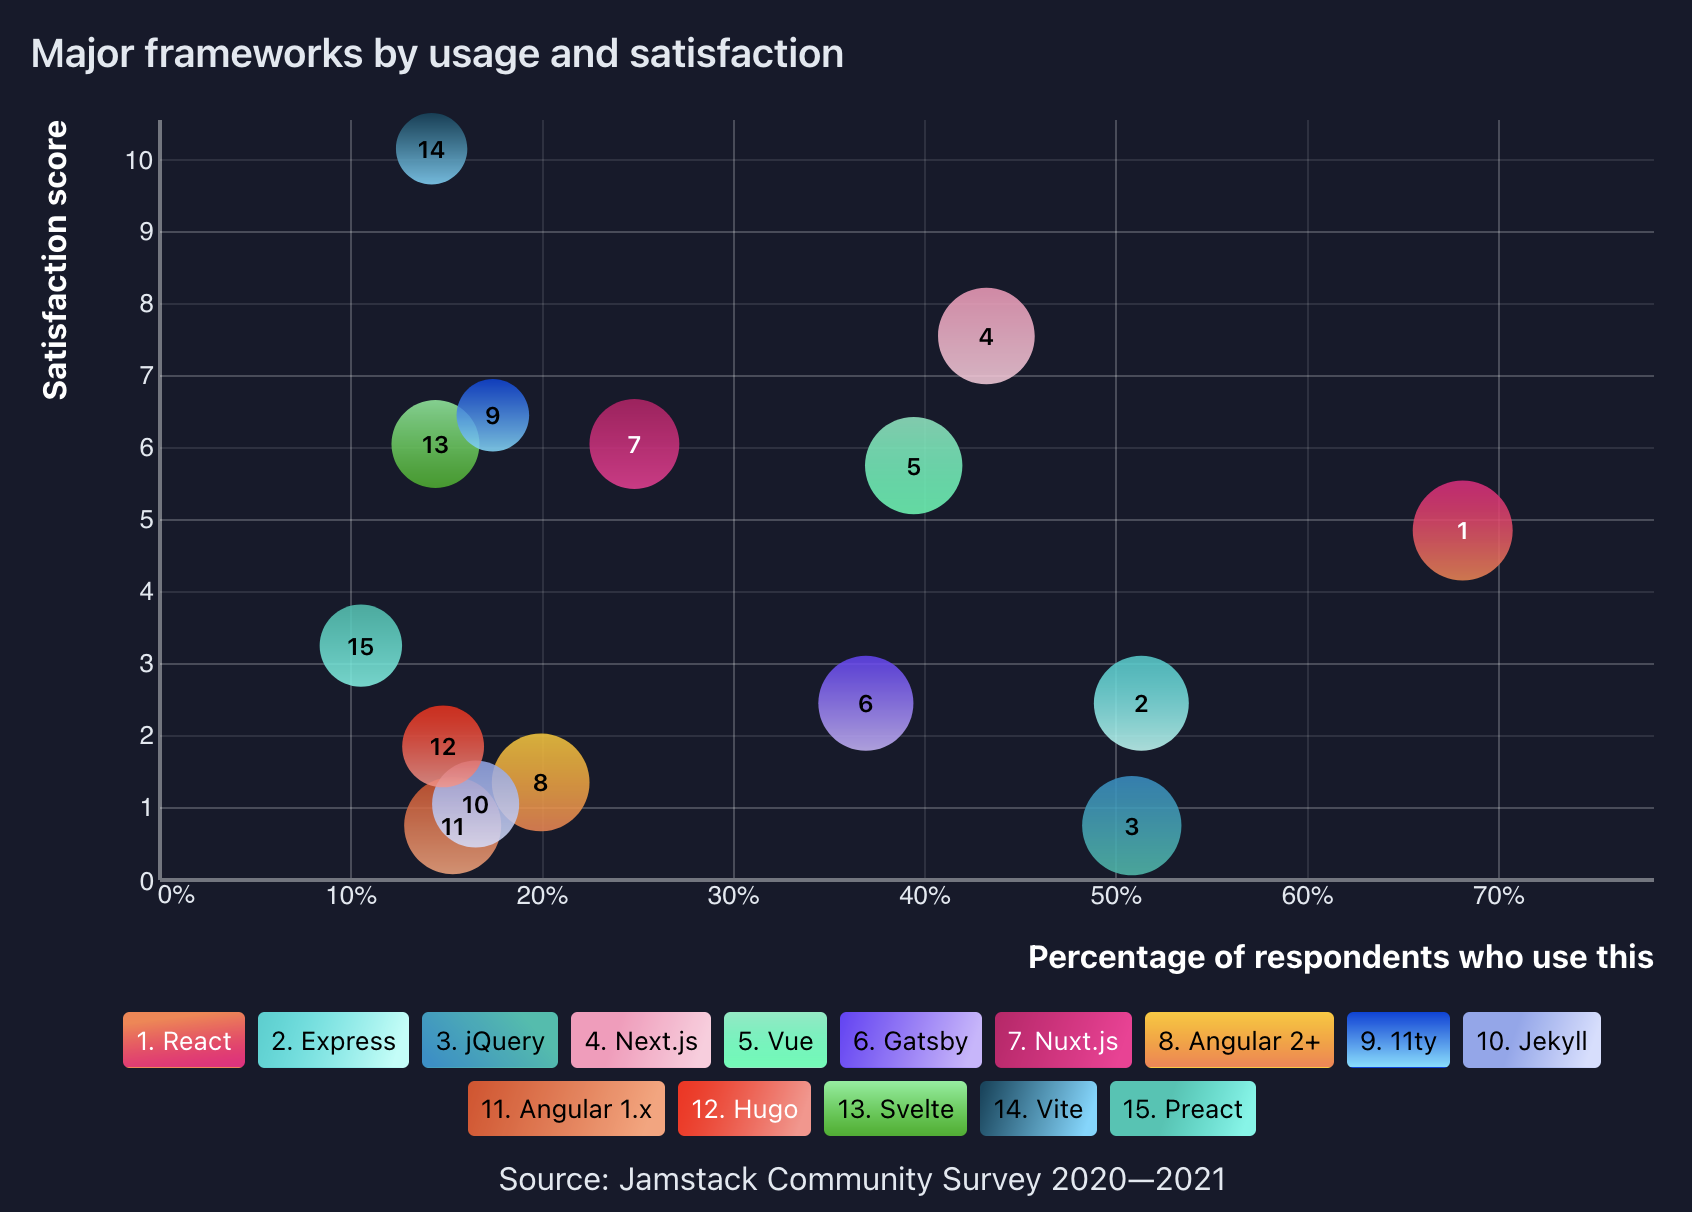 Graph of major frameworks showing React with greatest usage and Next.js as second-most satisfied users after Vite, plus 13 other frameworks.